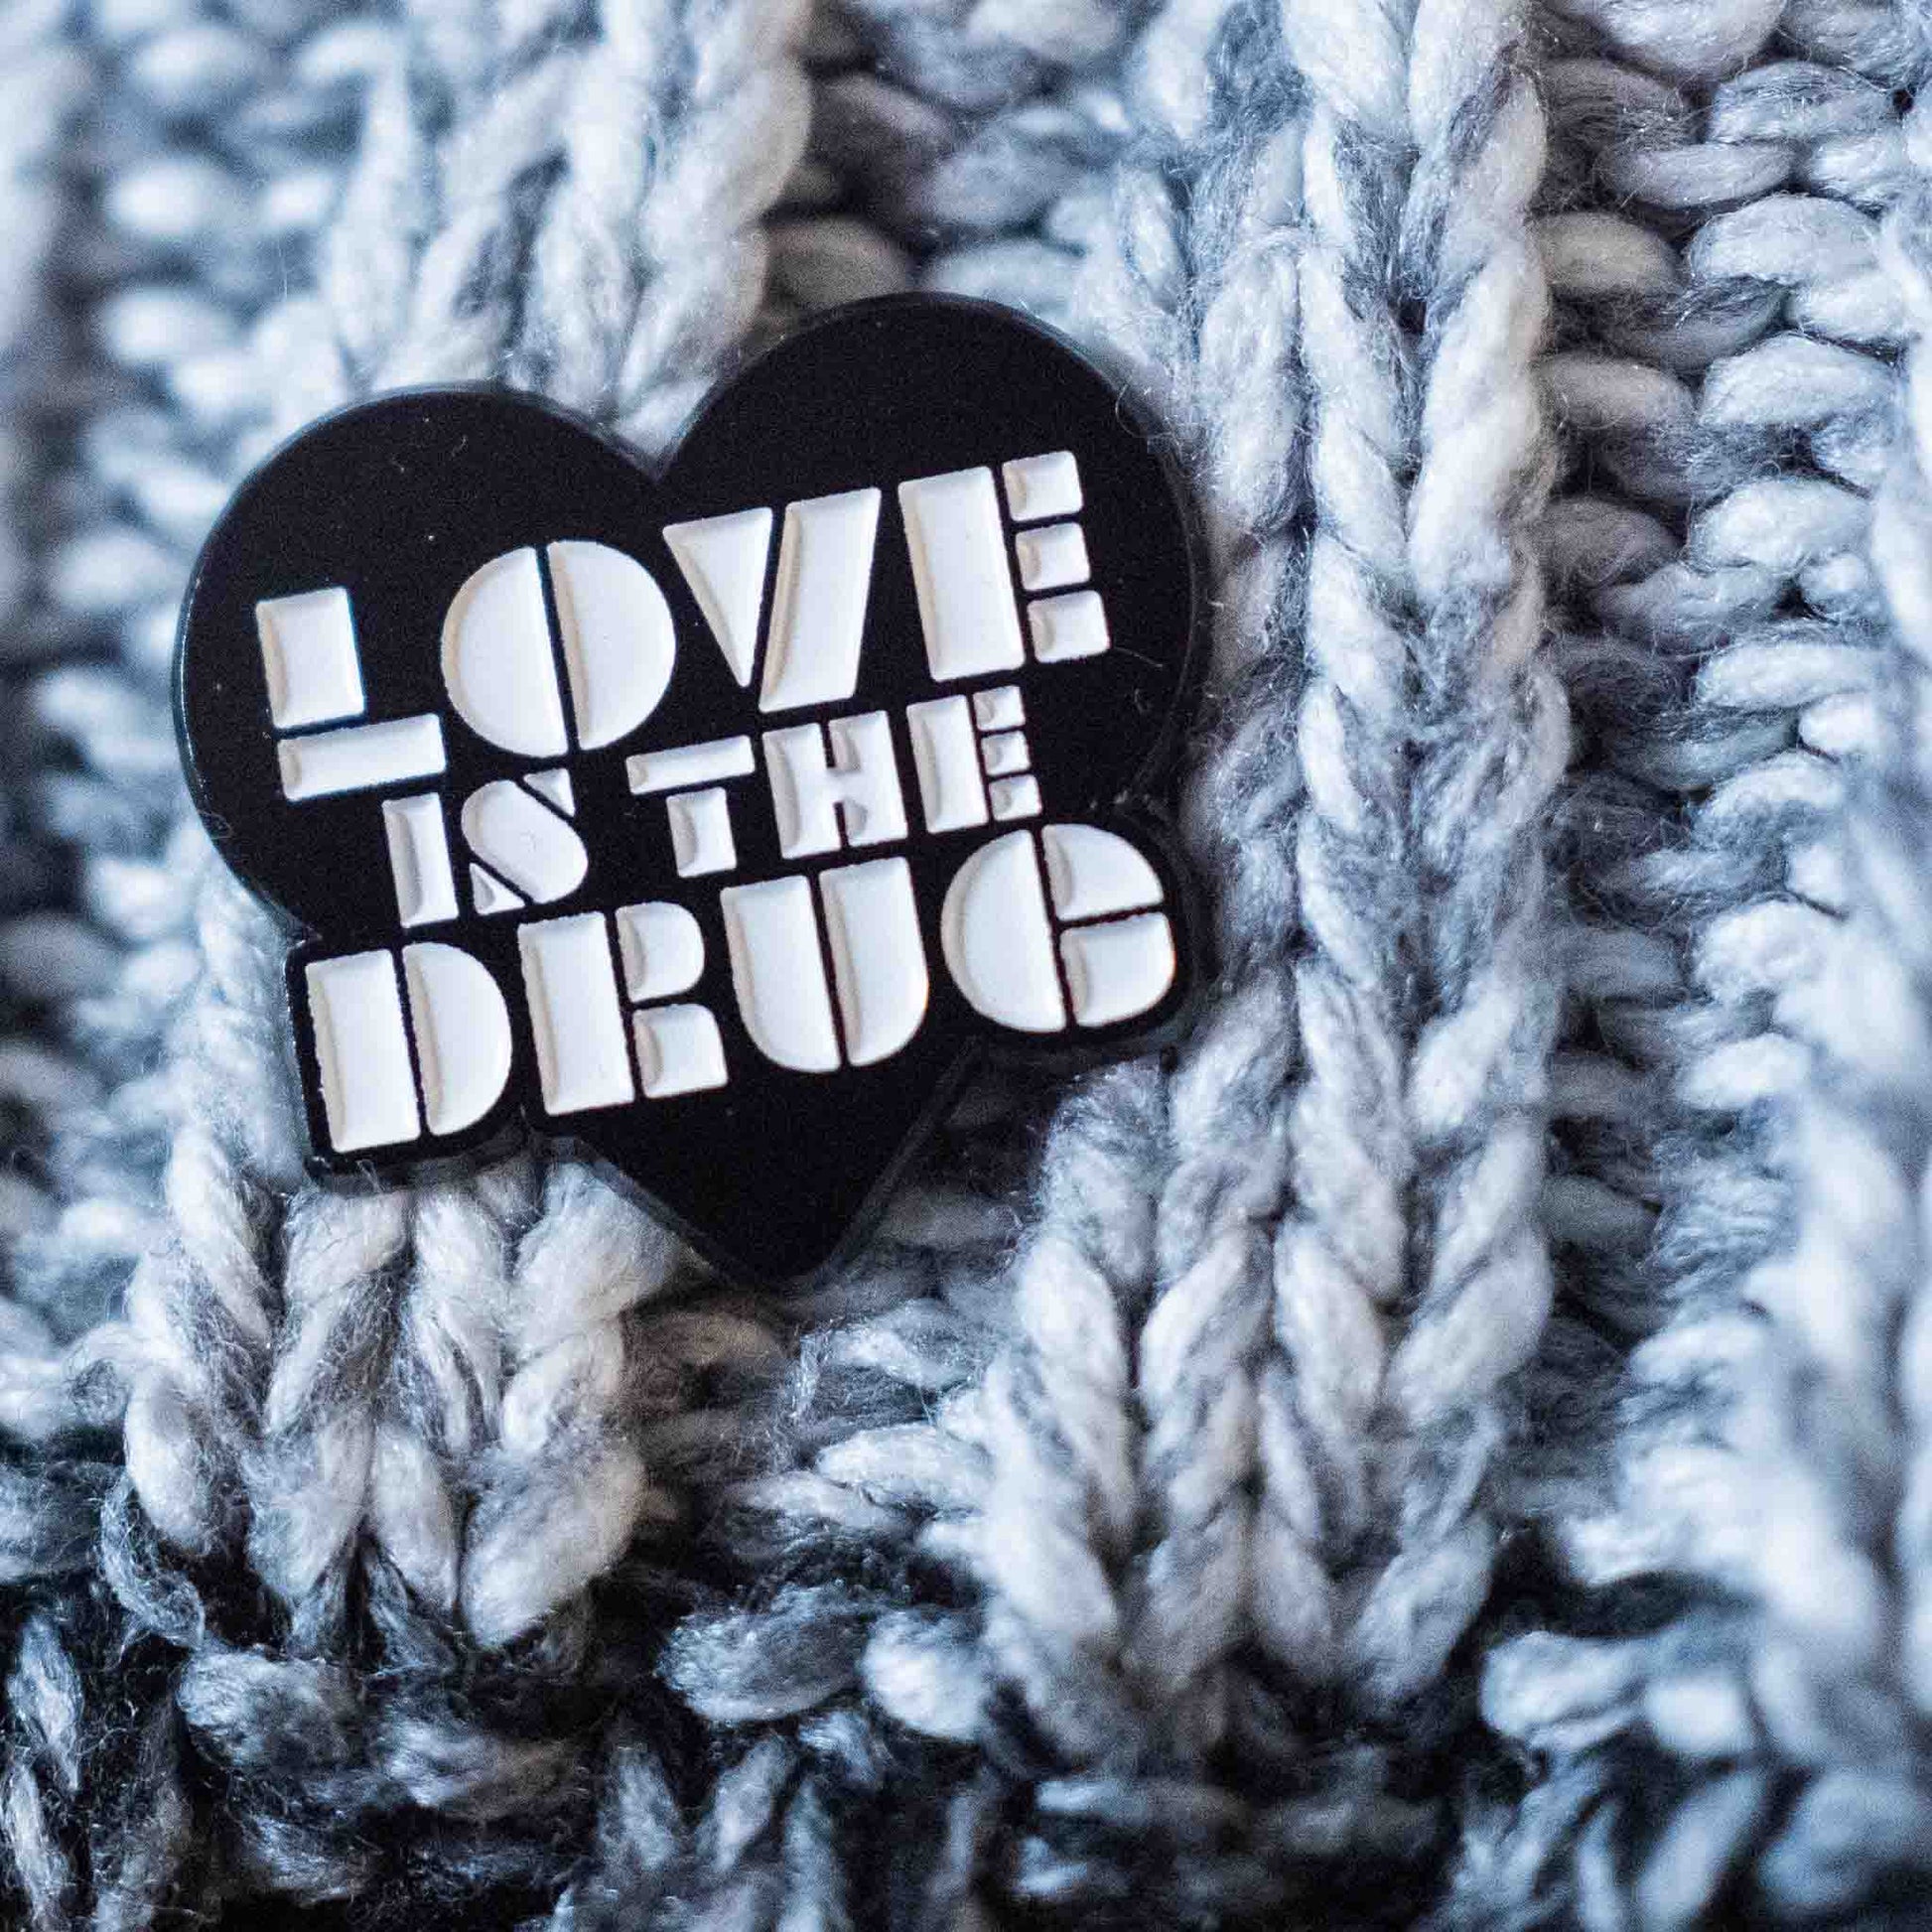 Black love is the drug pin badge in white enamel type on a wooly hat